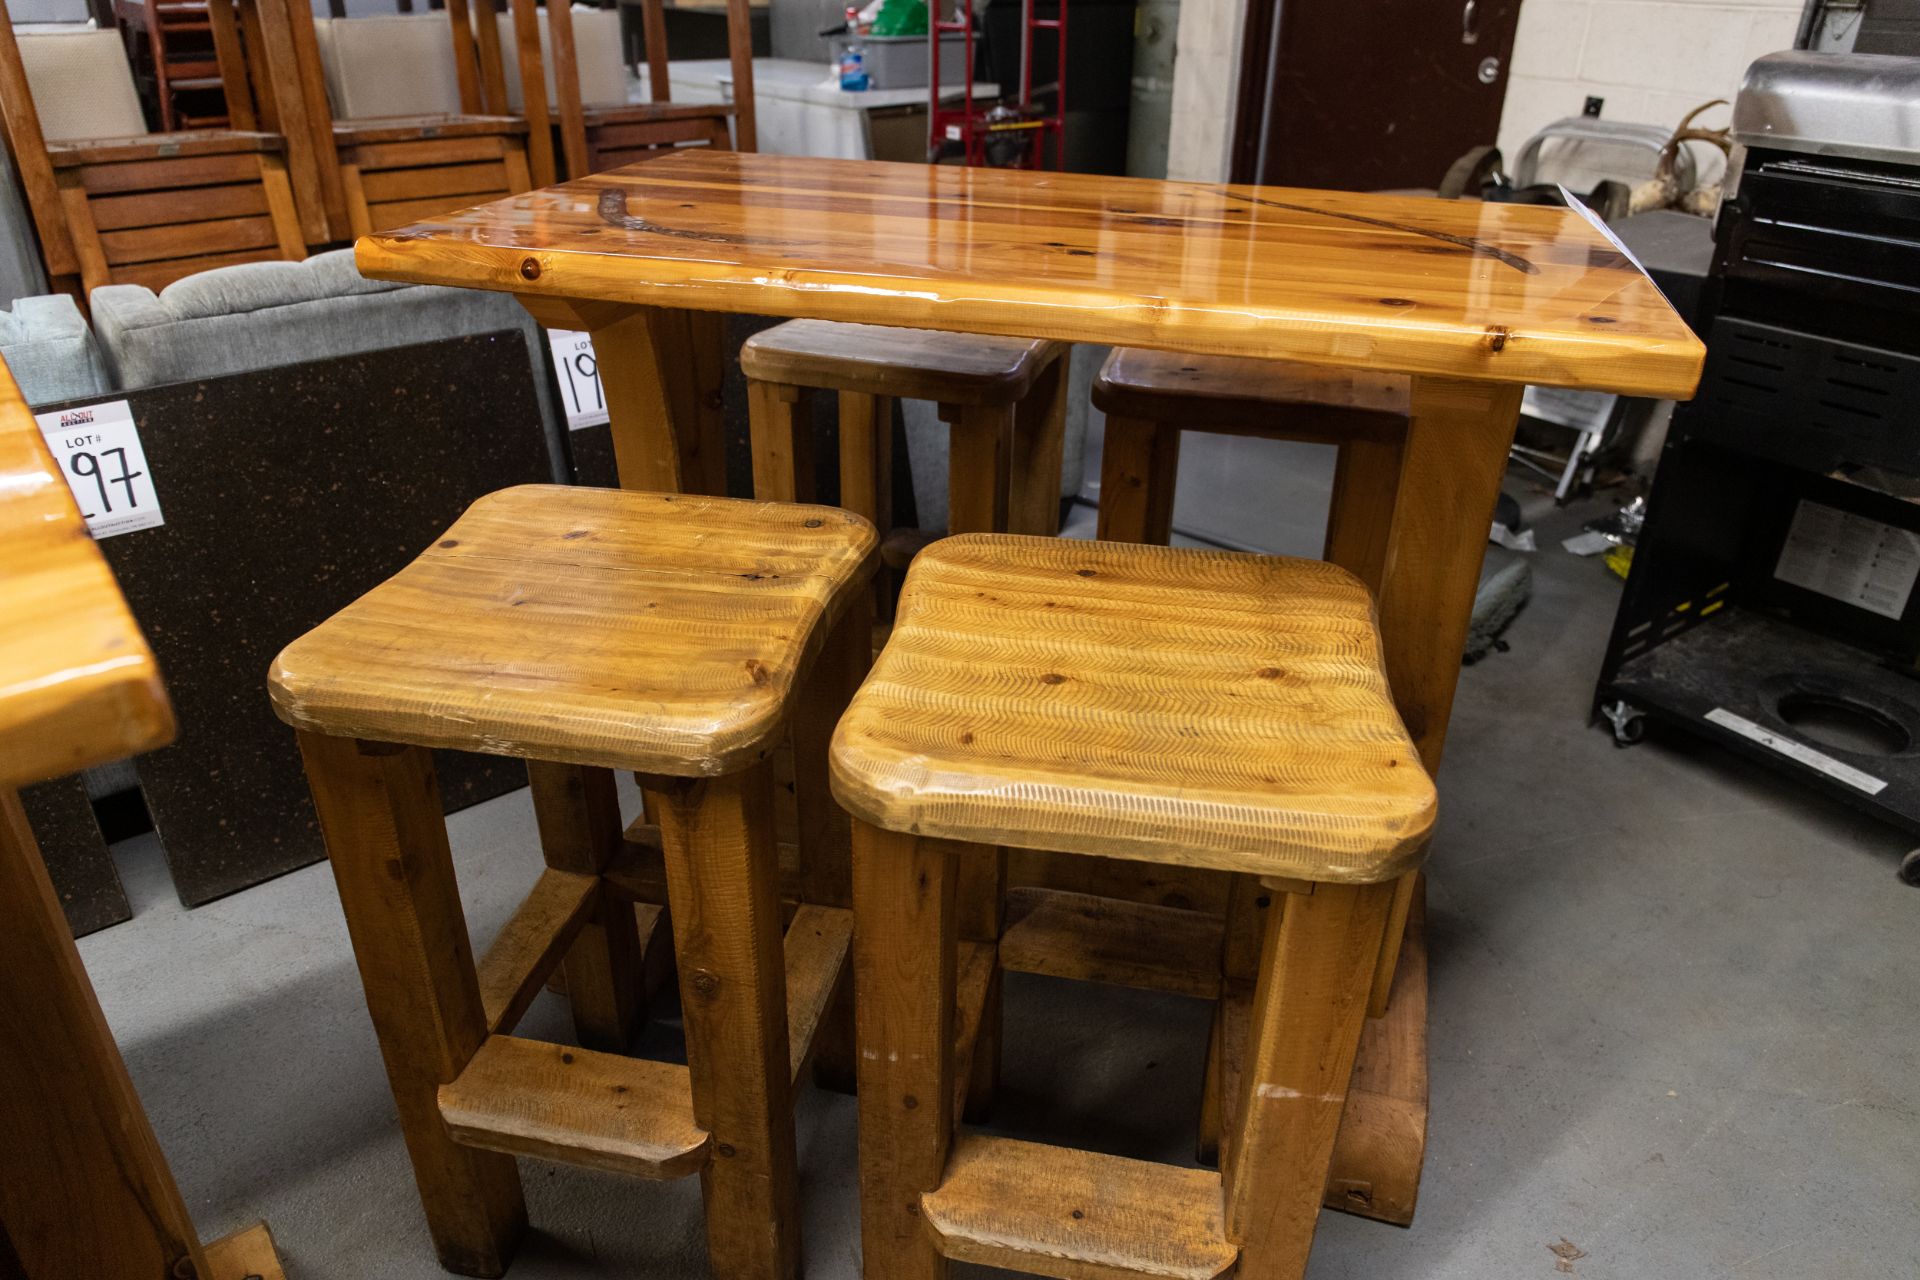 4' WHITE PINE HIGH TOP TABLE WITH 4 STOOLS H-42" W-28" L-48" - Image 3 of 3